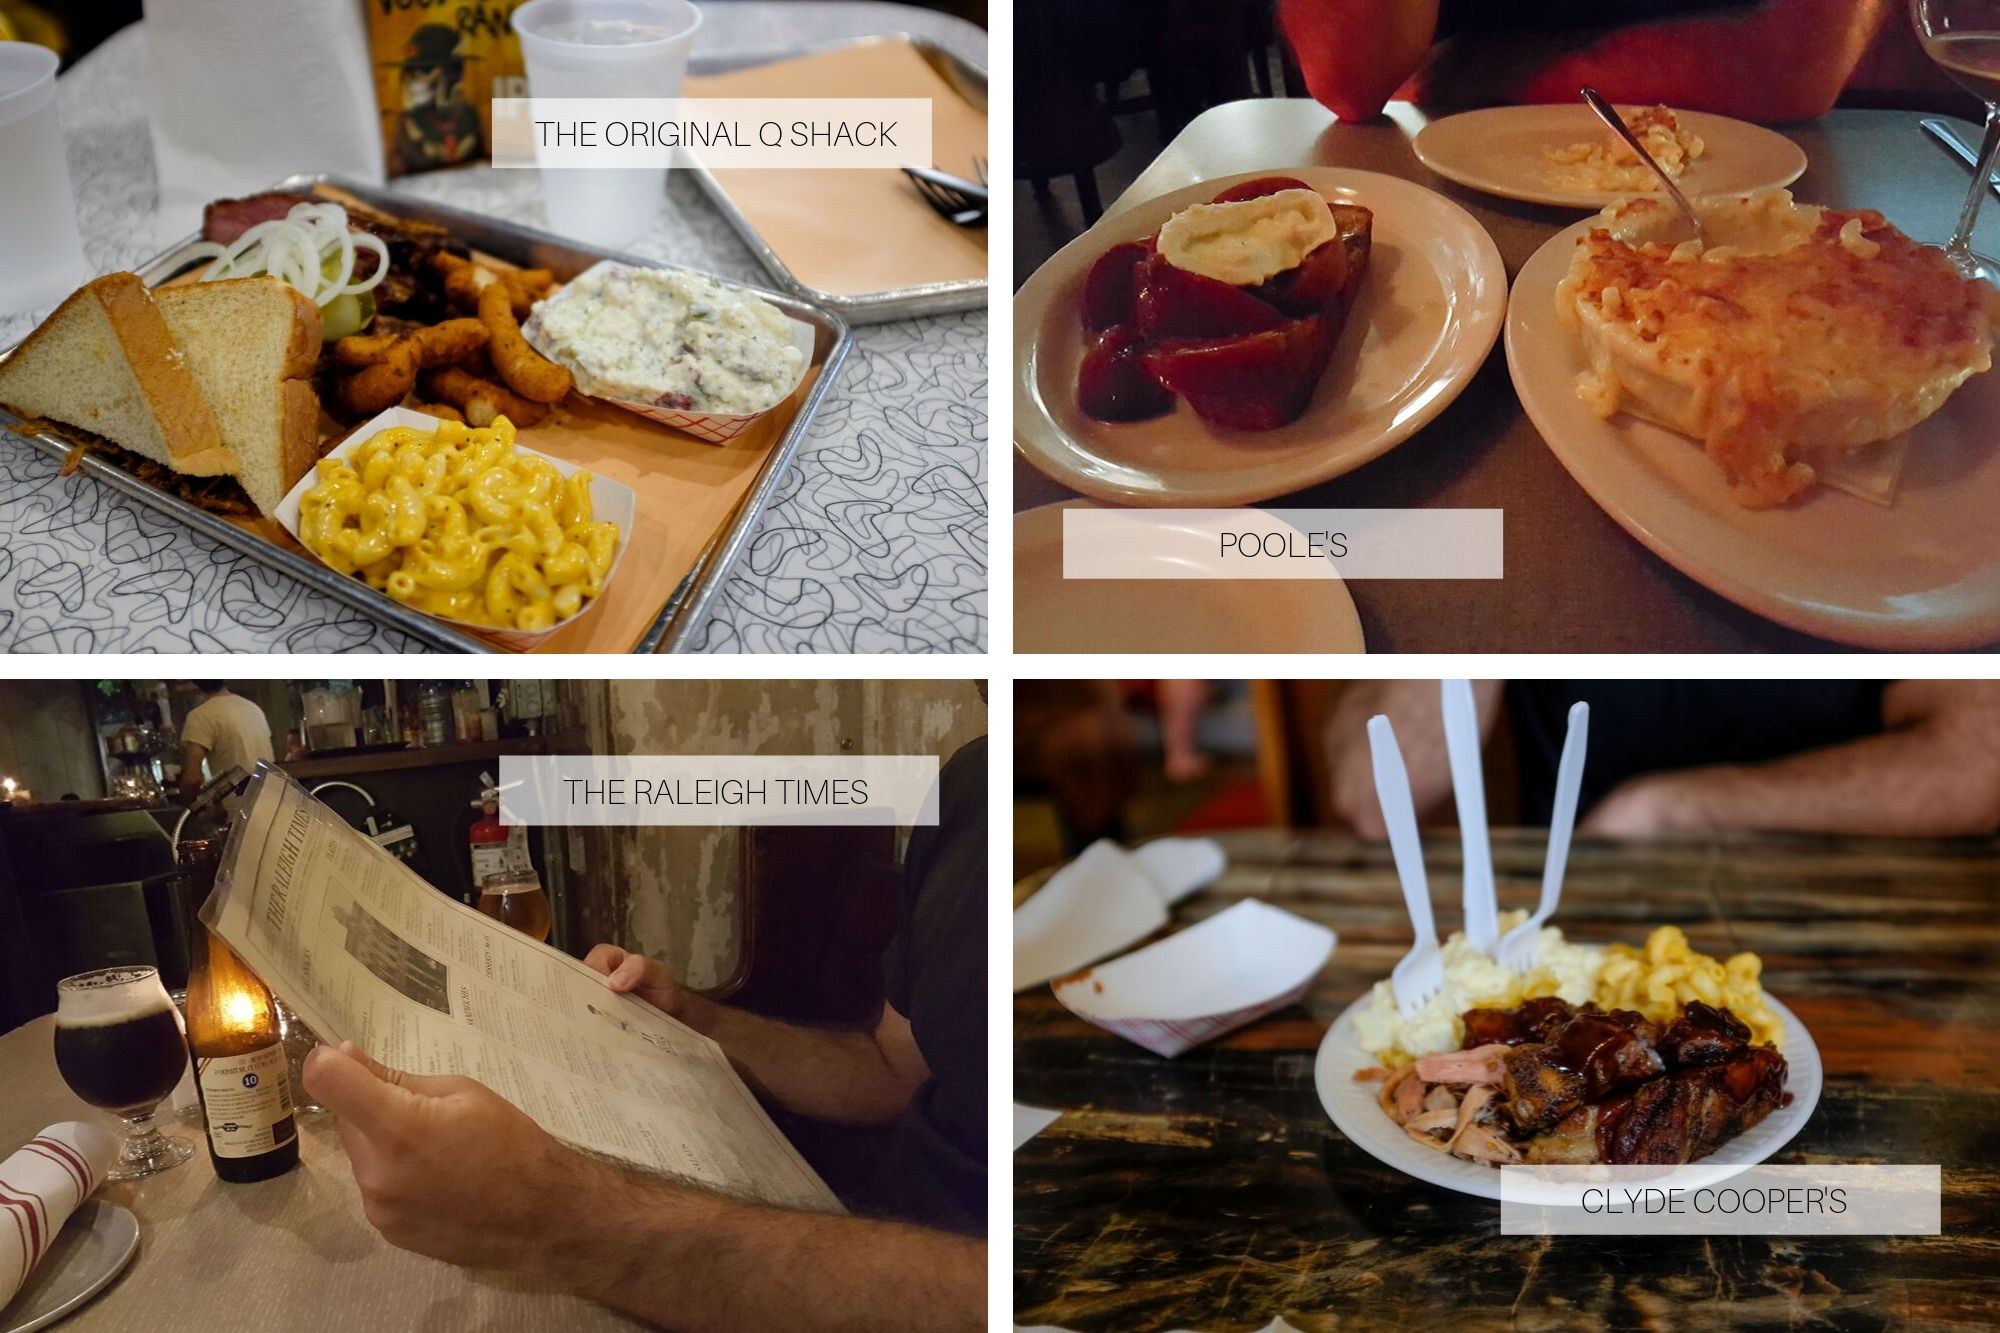 Collage: BBQ from Clyde Cooper's and The Original Q Shack, mac and cheese from Poole's, and the menu at The Raleigh Times